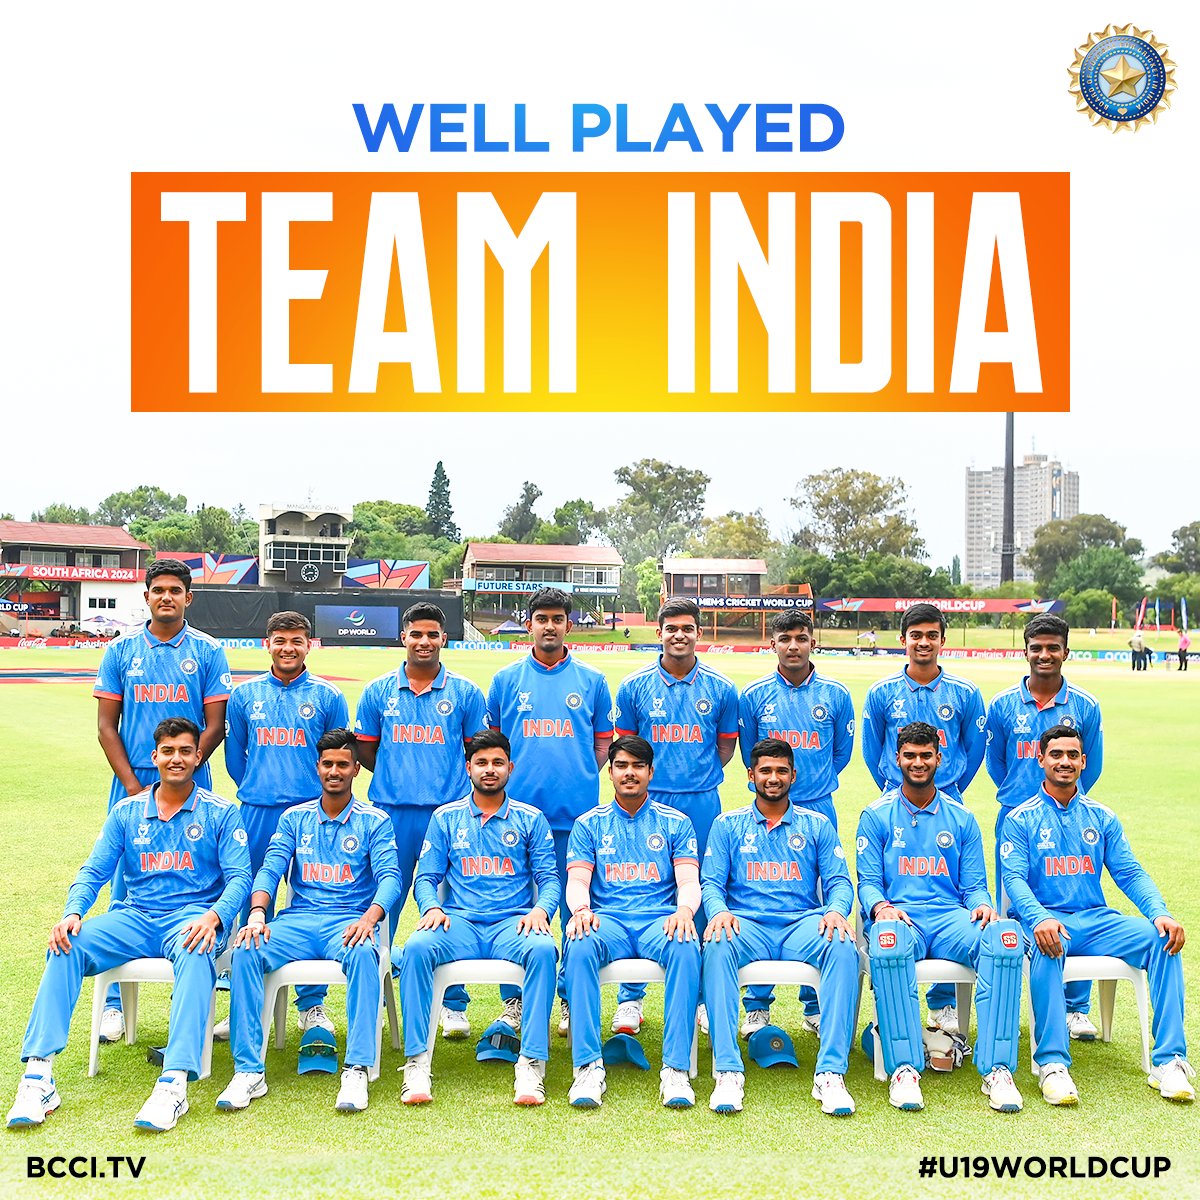 Super proud of the boys in blue !! They had an unbeaten campaign until the very last game & played very well 👏🏻 I'm sure many future stars of the country will be gotten from here ✨️

#U19WorldCupFinal • #INDvAUS